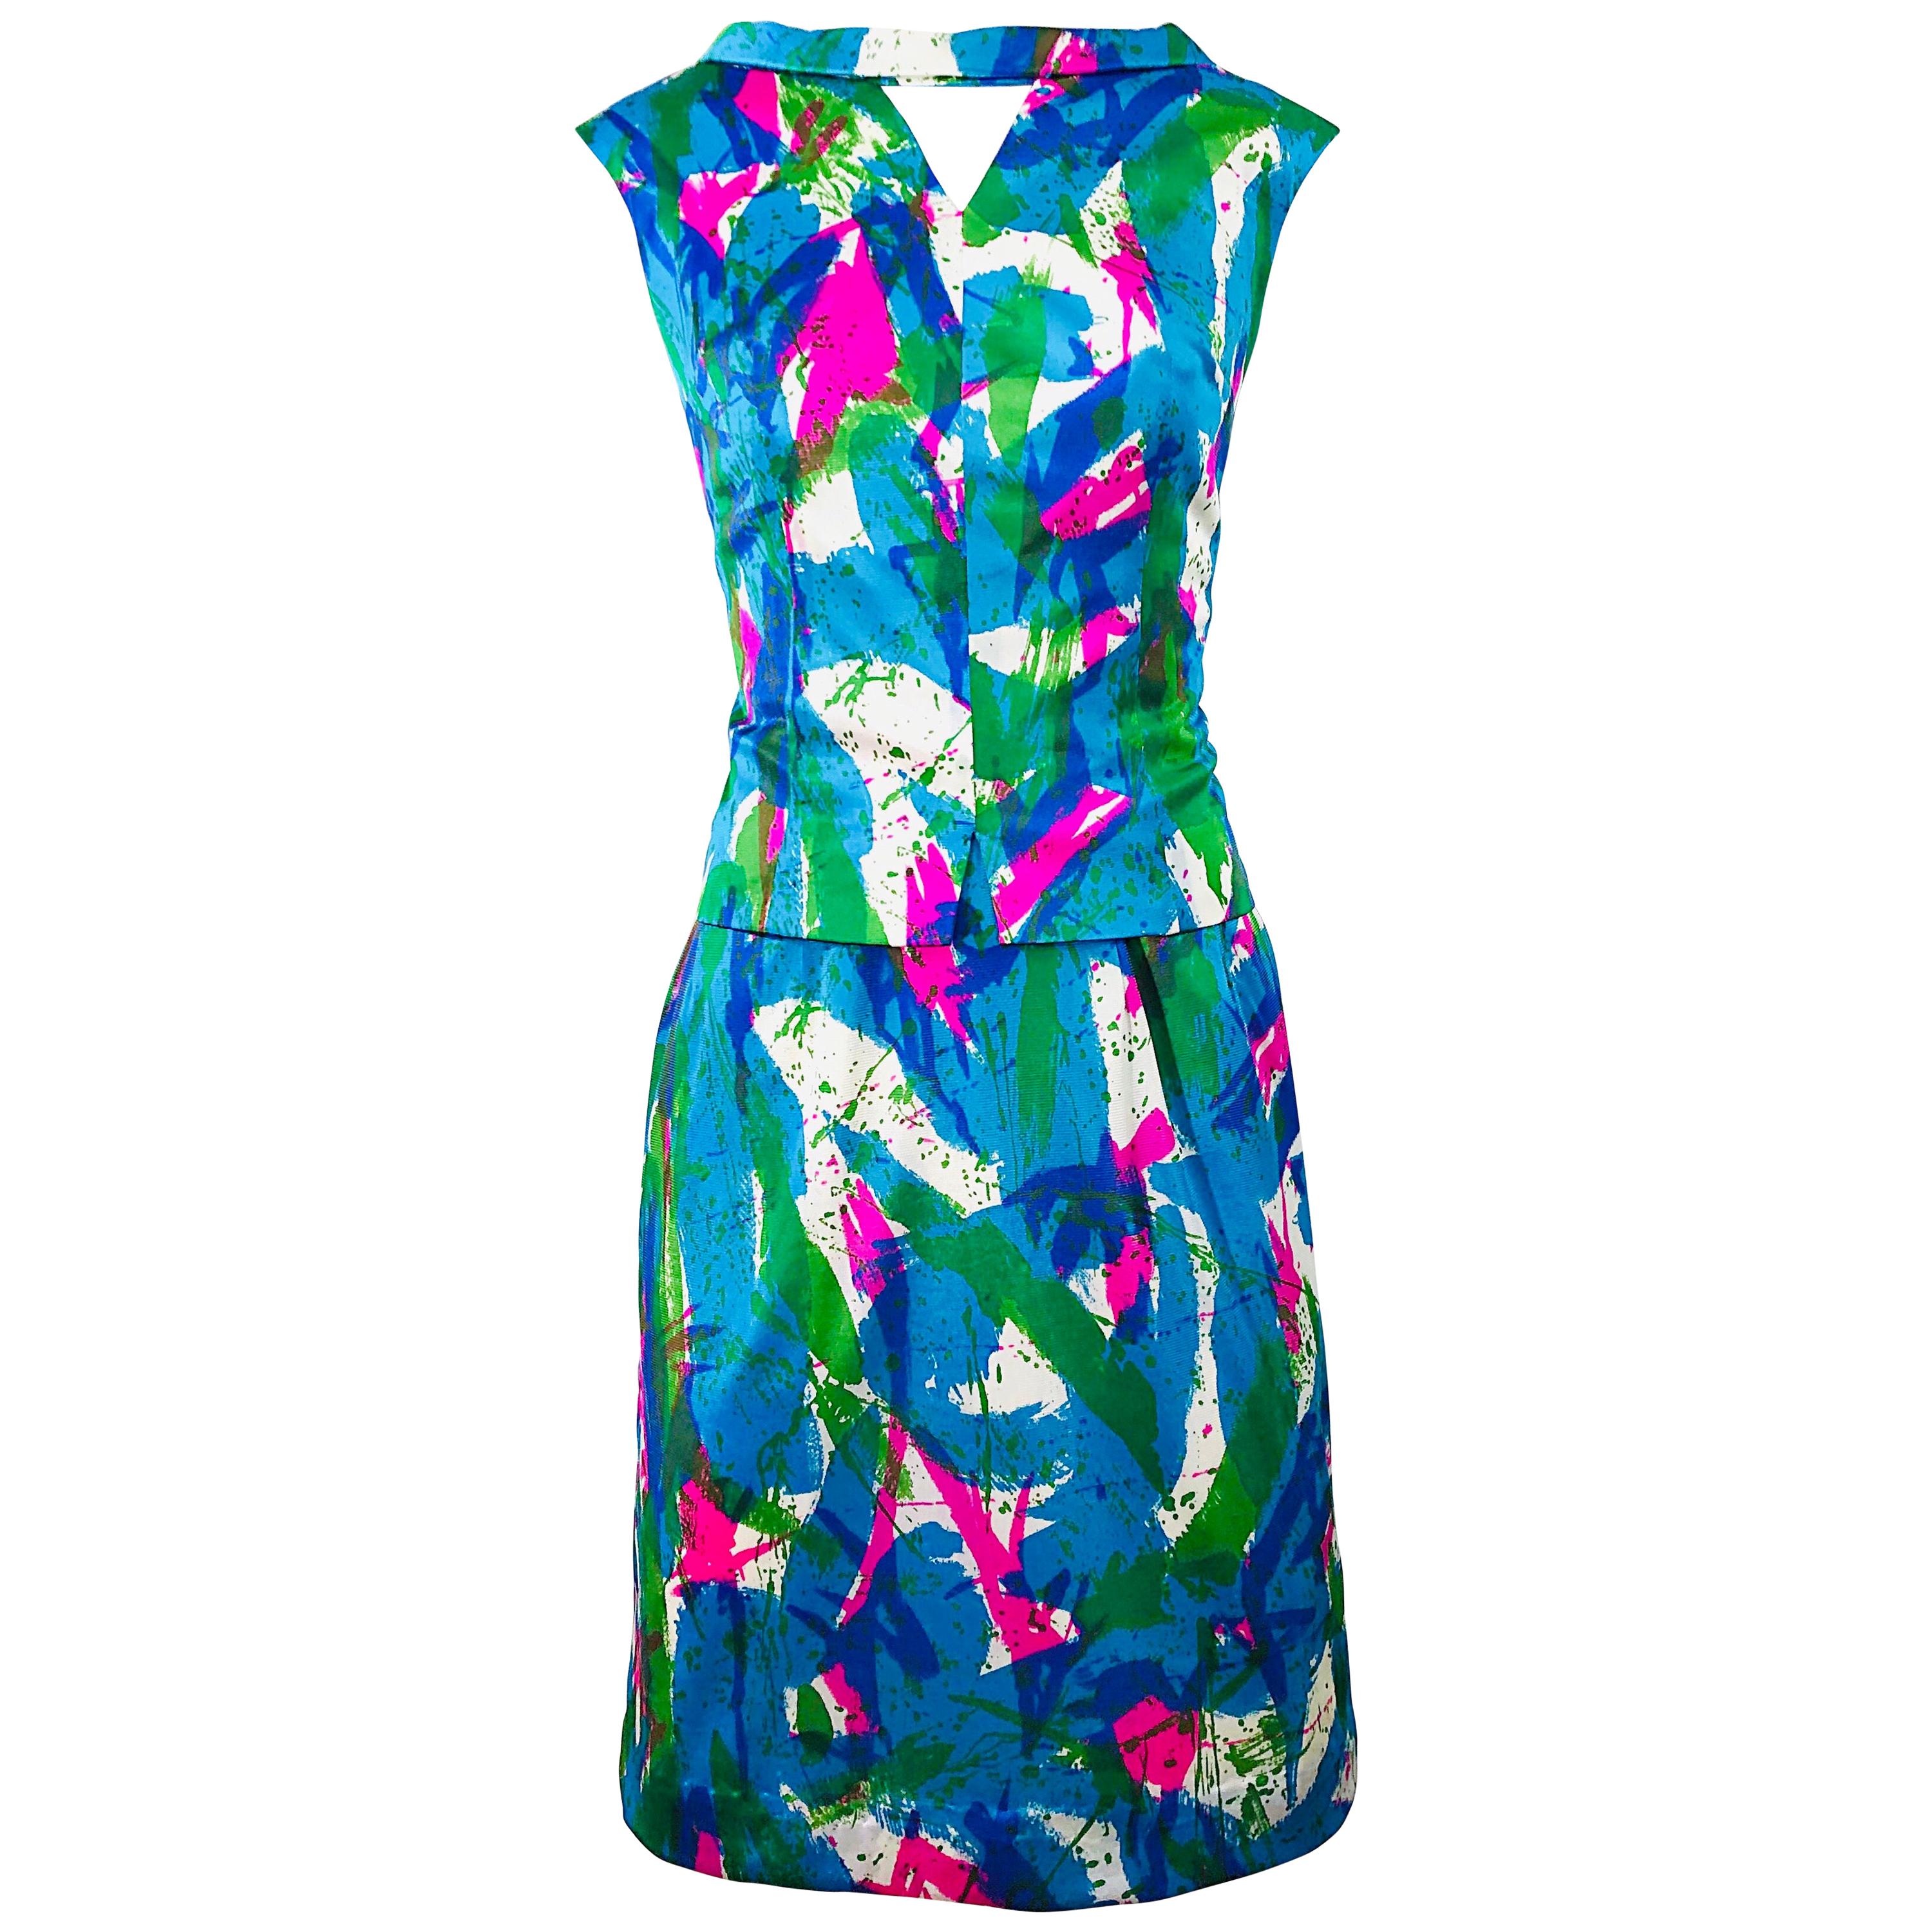 Chic 1960s Neon Abstract Print Two Piece Vintage 60s Sheath Dress + Top Blouse 